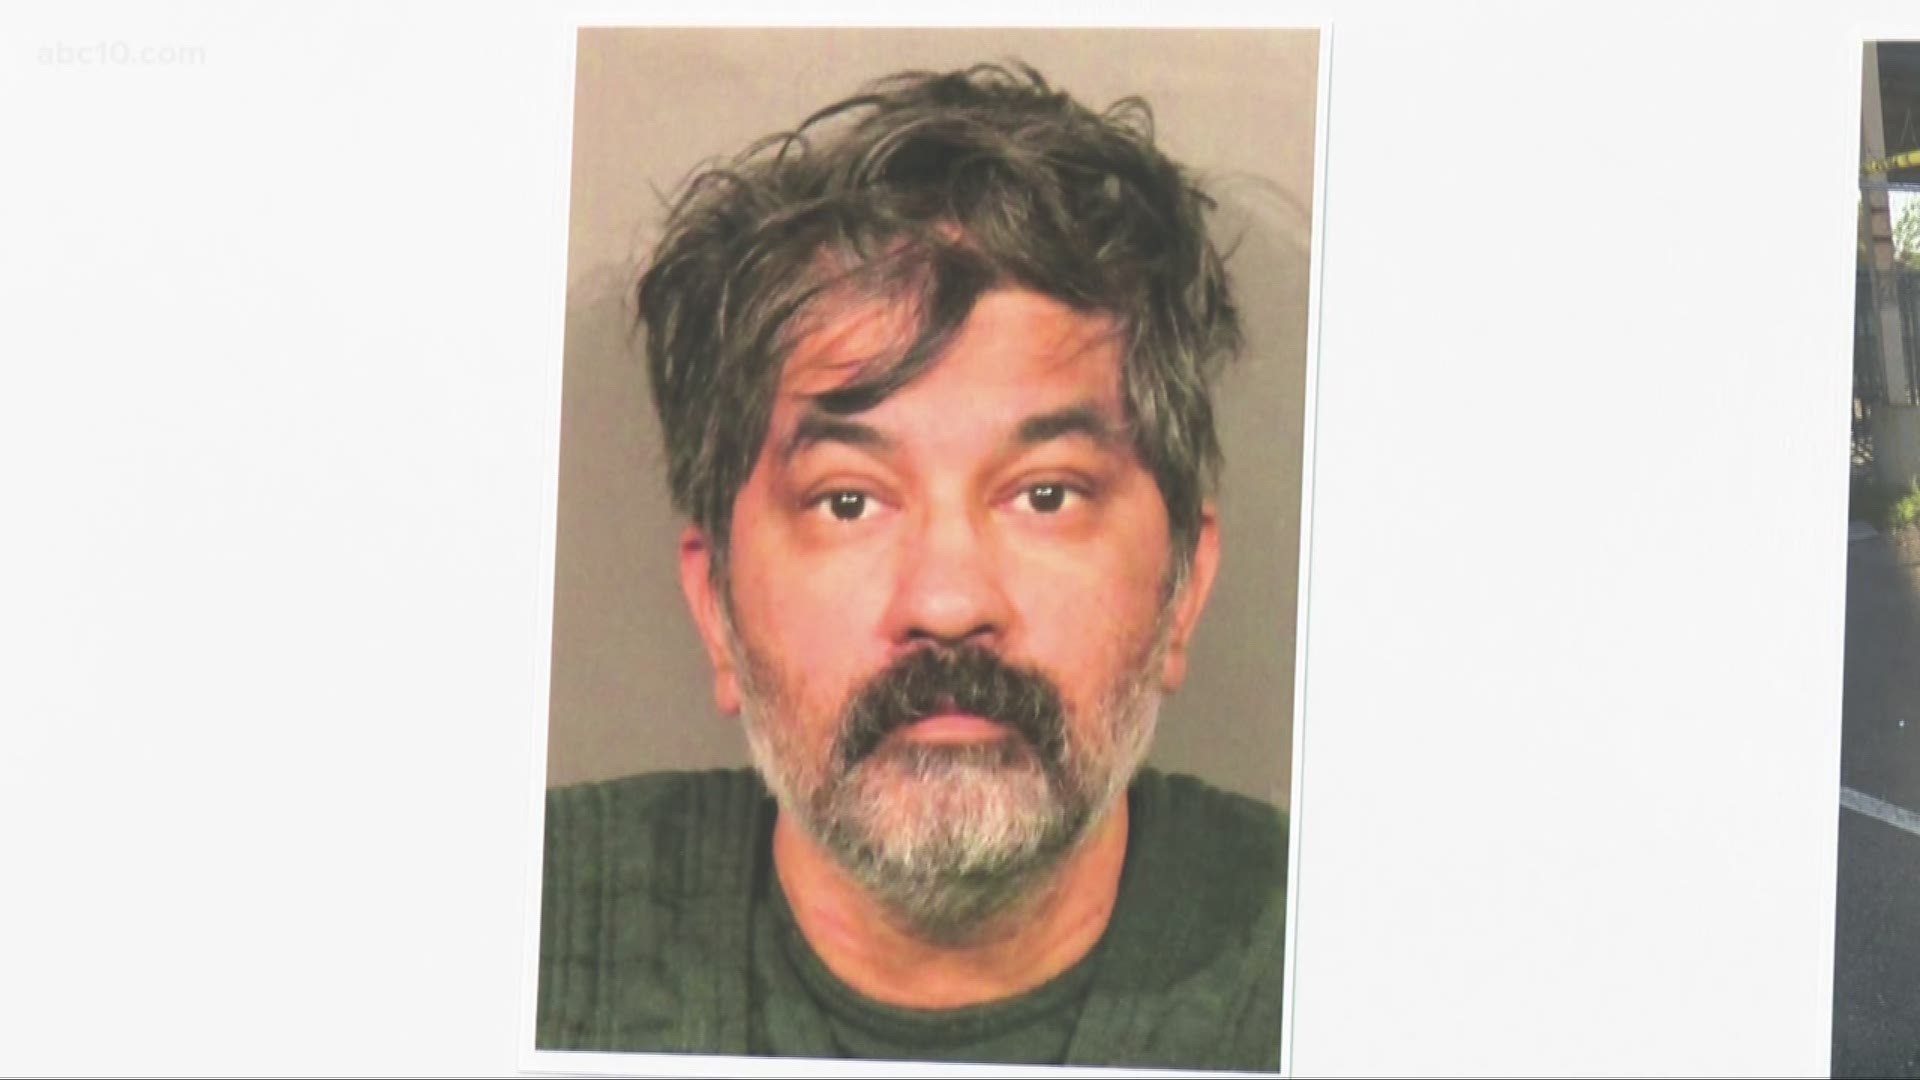 Police say the lone suspect in Roseville's quadruple homicide has been identified as Shankar Hangud.